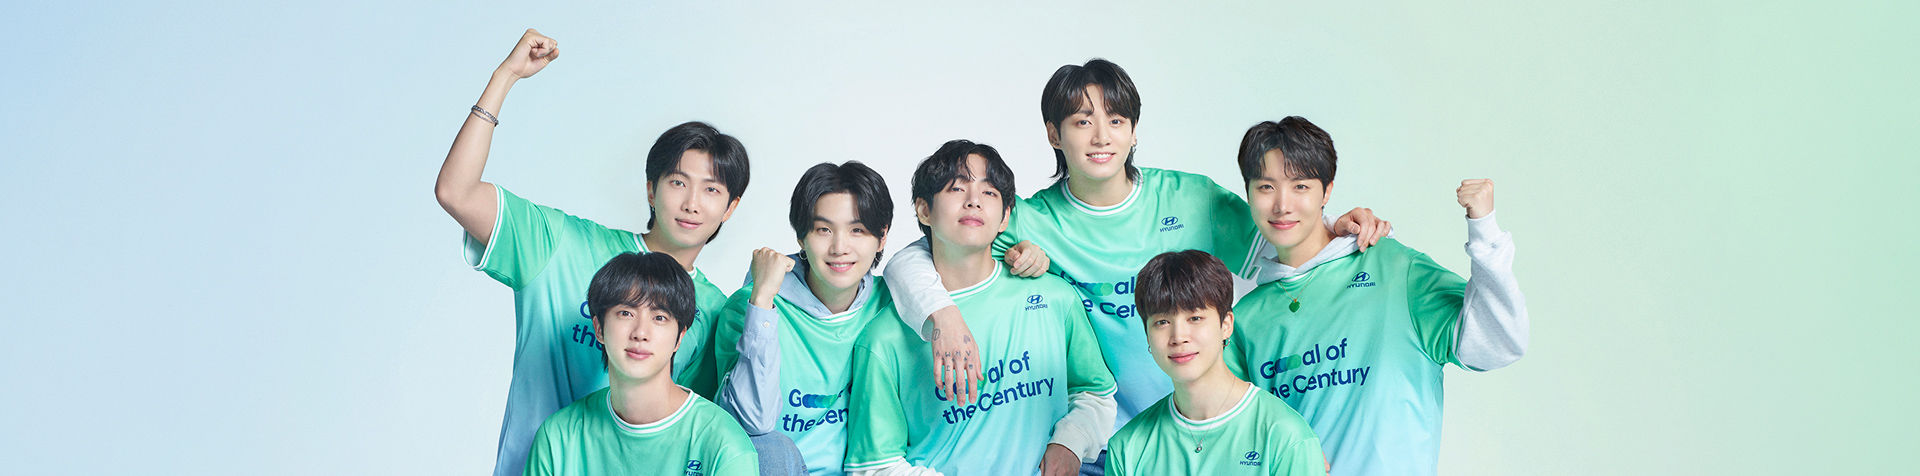 All 7 BTS members standing in a line facing forward. Each member has a green and gray Team Century shirt on with the Hyundai logo and Goal of the Century emblazoned in dark blue across the front. 